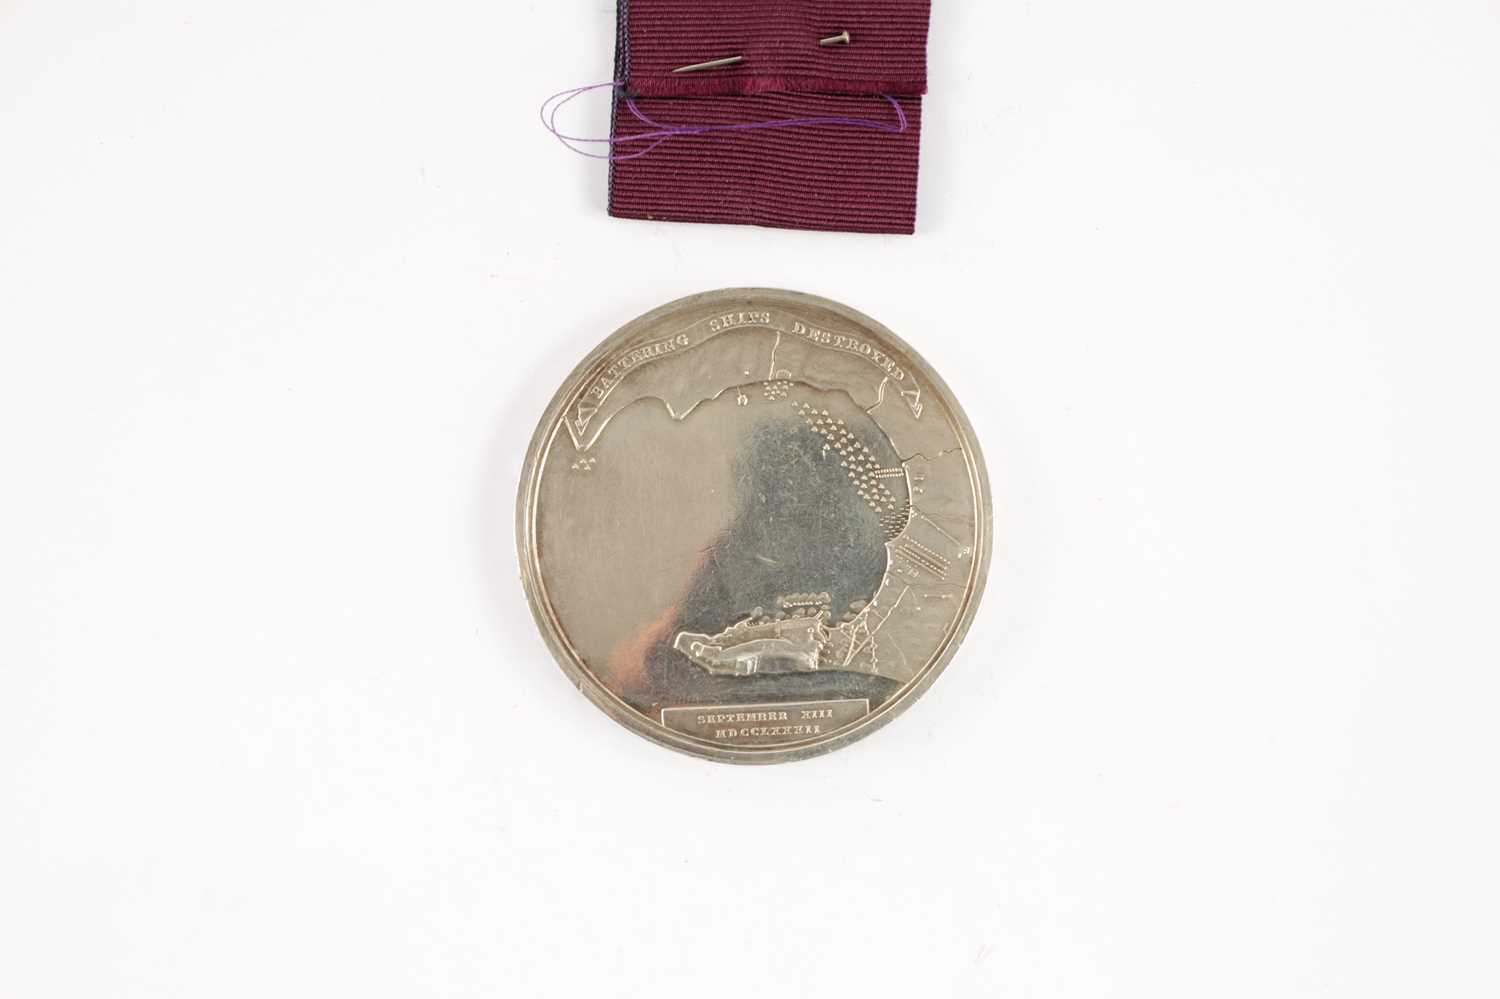 A DEFENCE OF GIBRALTAR 1779-1783, SIR THOMAS PICTON’S MEDAL - Image 3 of 3